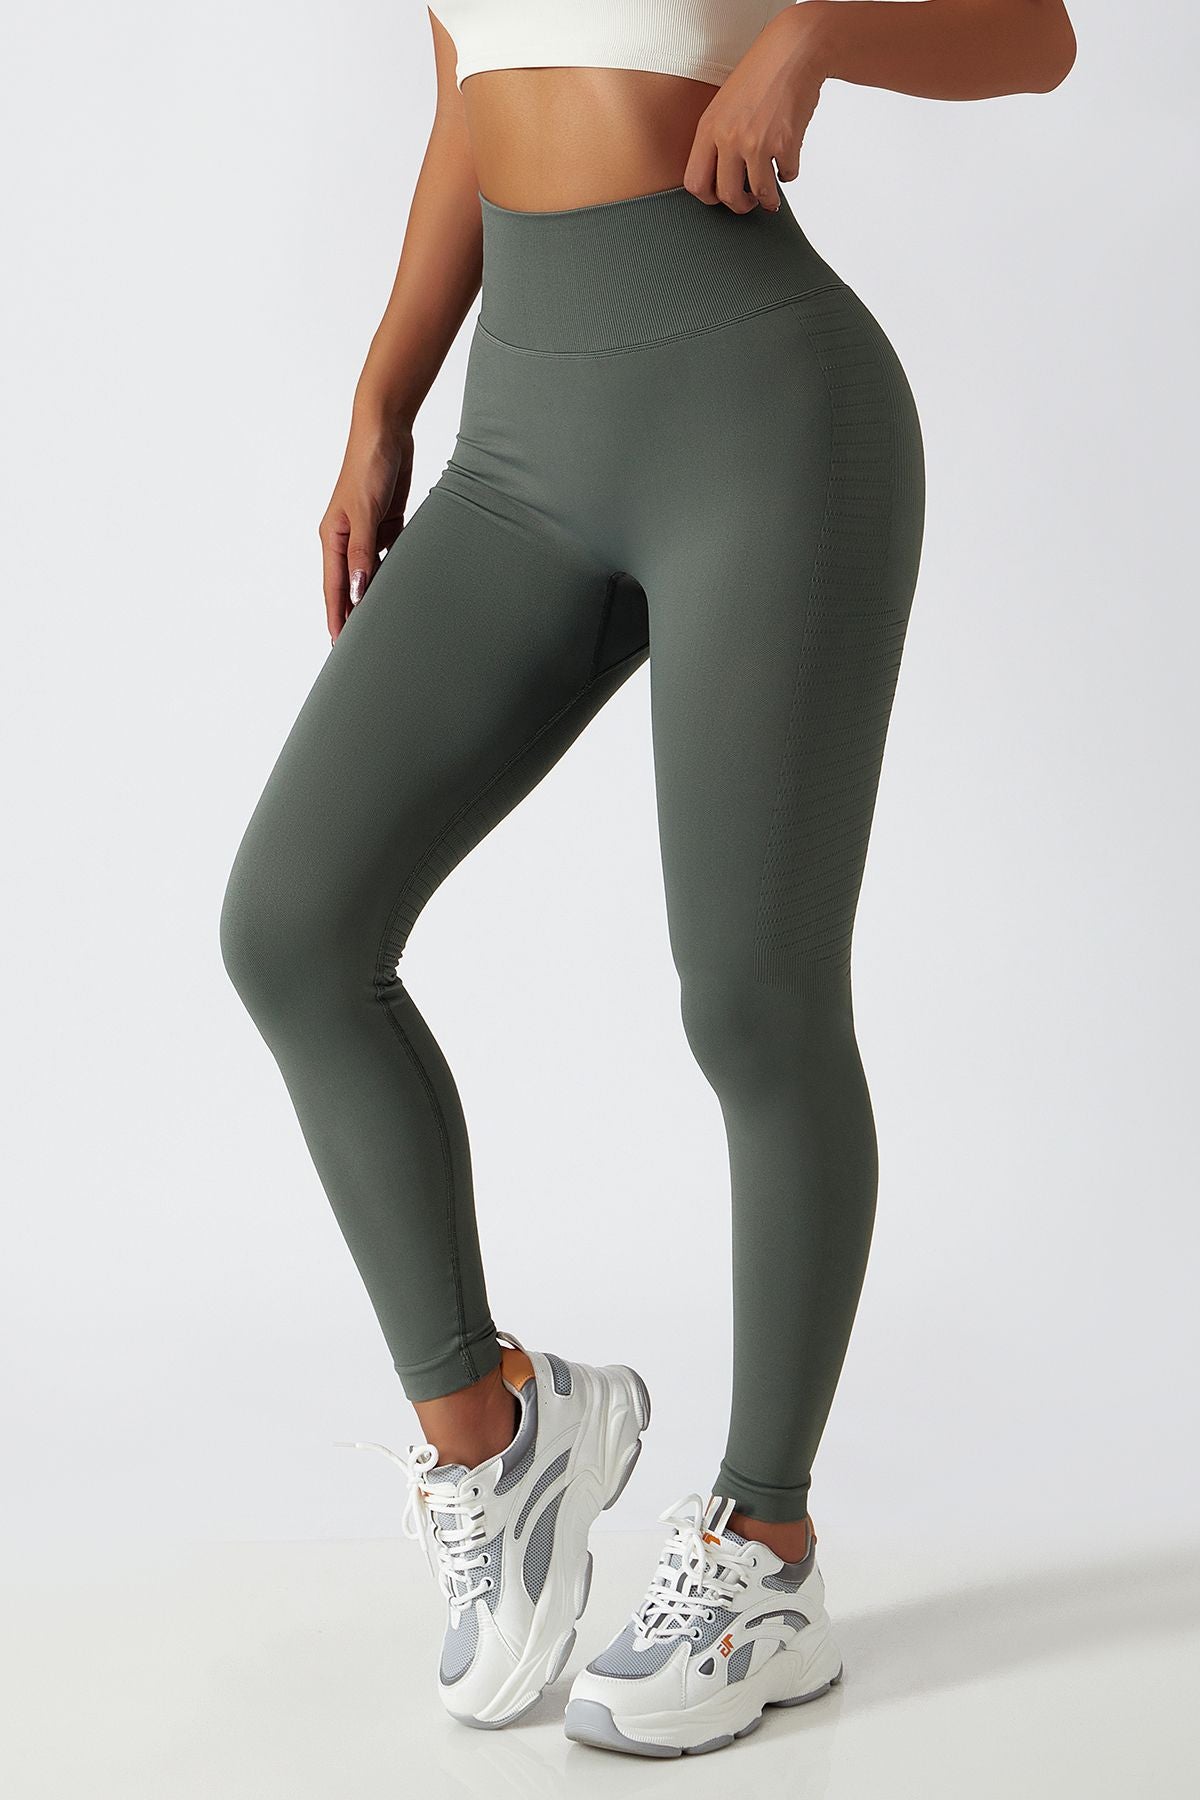 SHOWITTY Women Butt Lifting Ribbed Seamless Leggings High Waisted